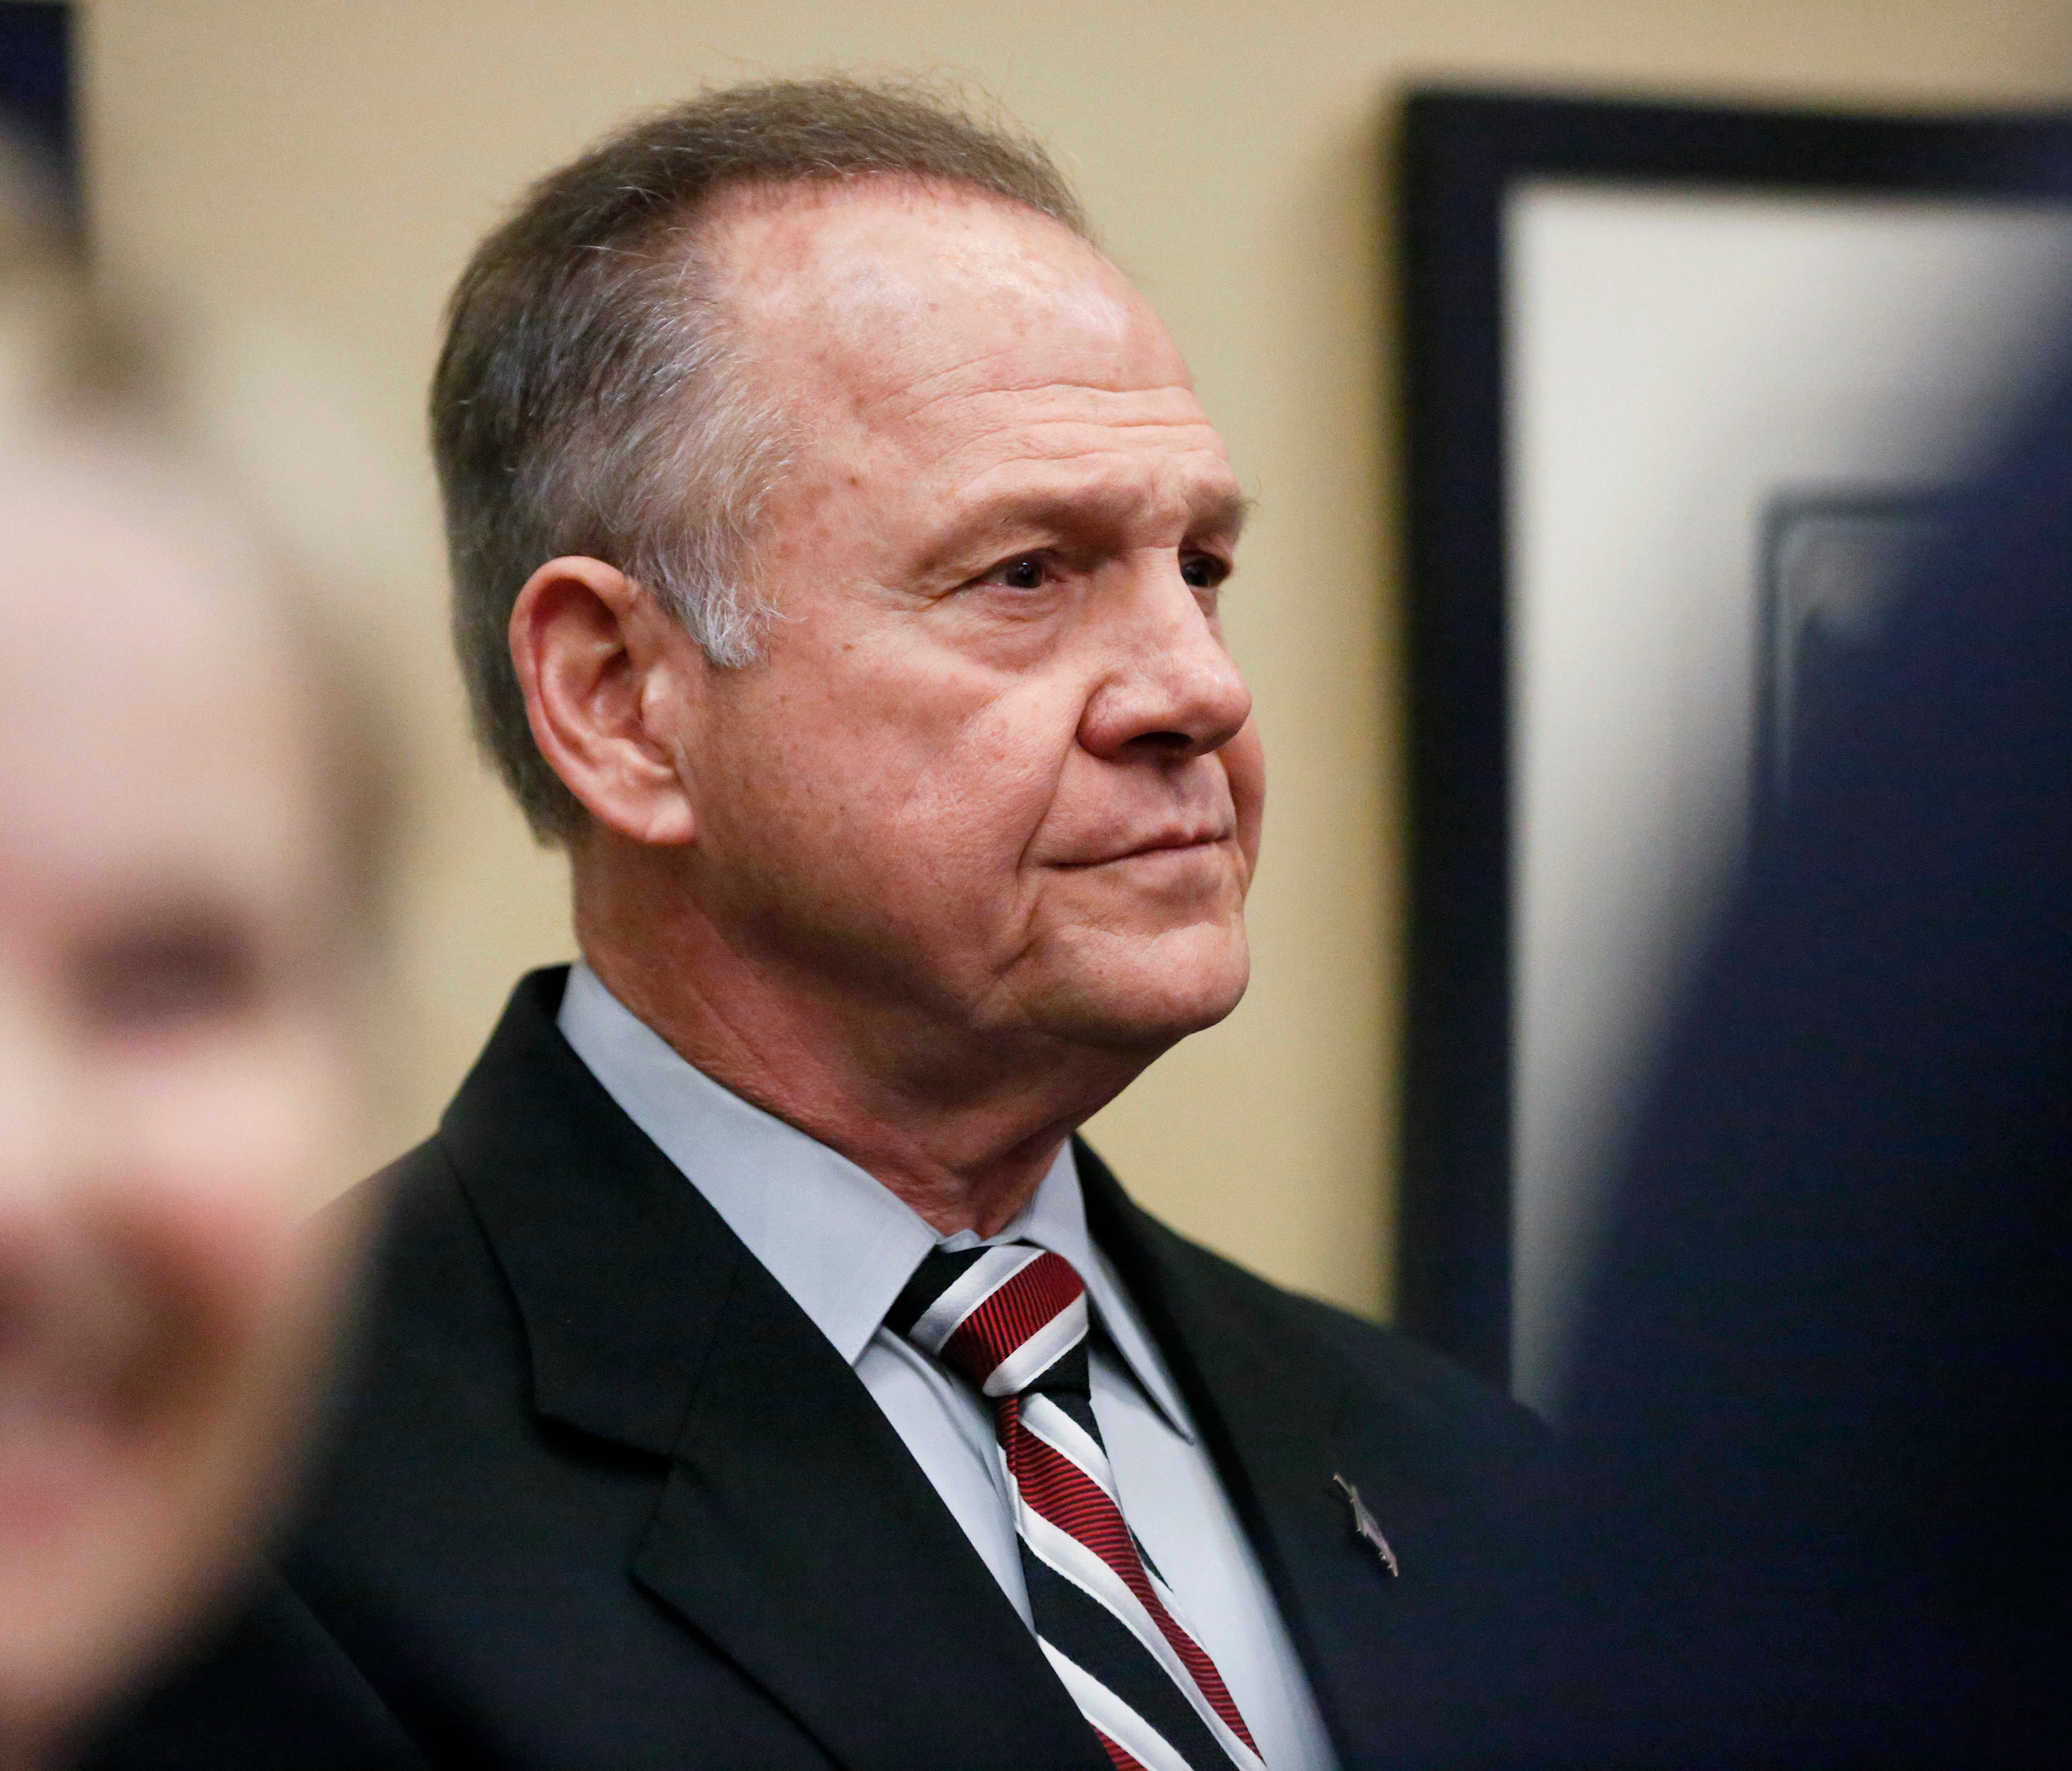 Former Alabama Chief Justice and U.S. Senate candidate Roy Moore waits to speak the Vestavia Hills Public library, Saturday, Nov. 11, 2017, in Birmingham, Ala. According to a Thursday, Nov. 9 Washington Post story an Alabama woman said Moore made ina